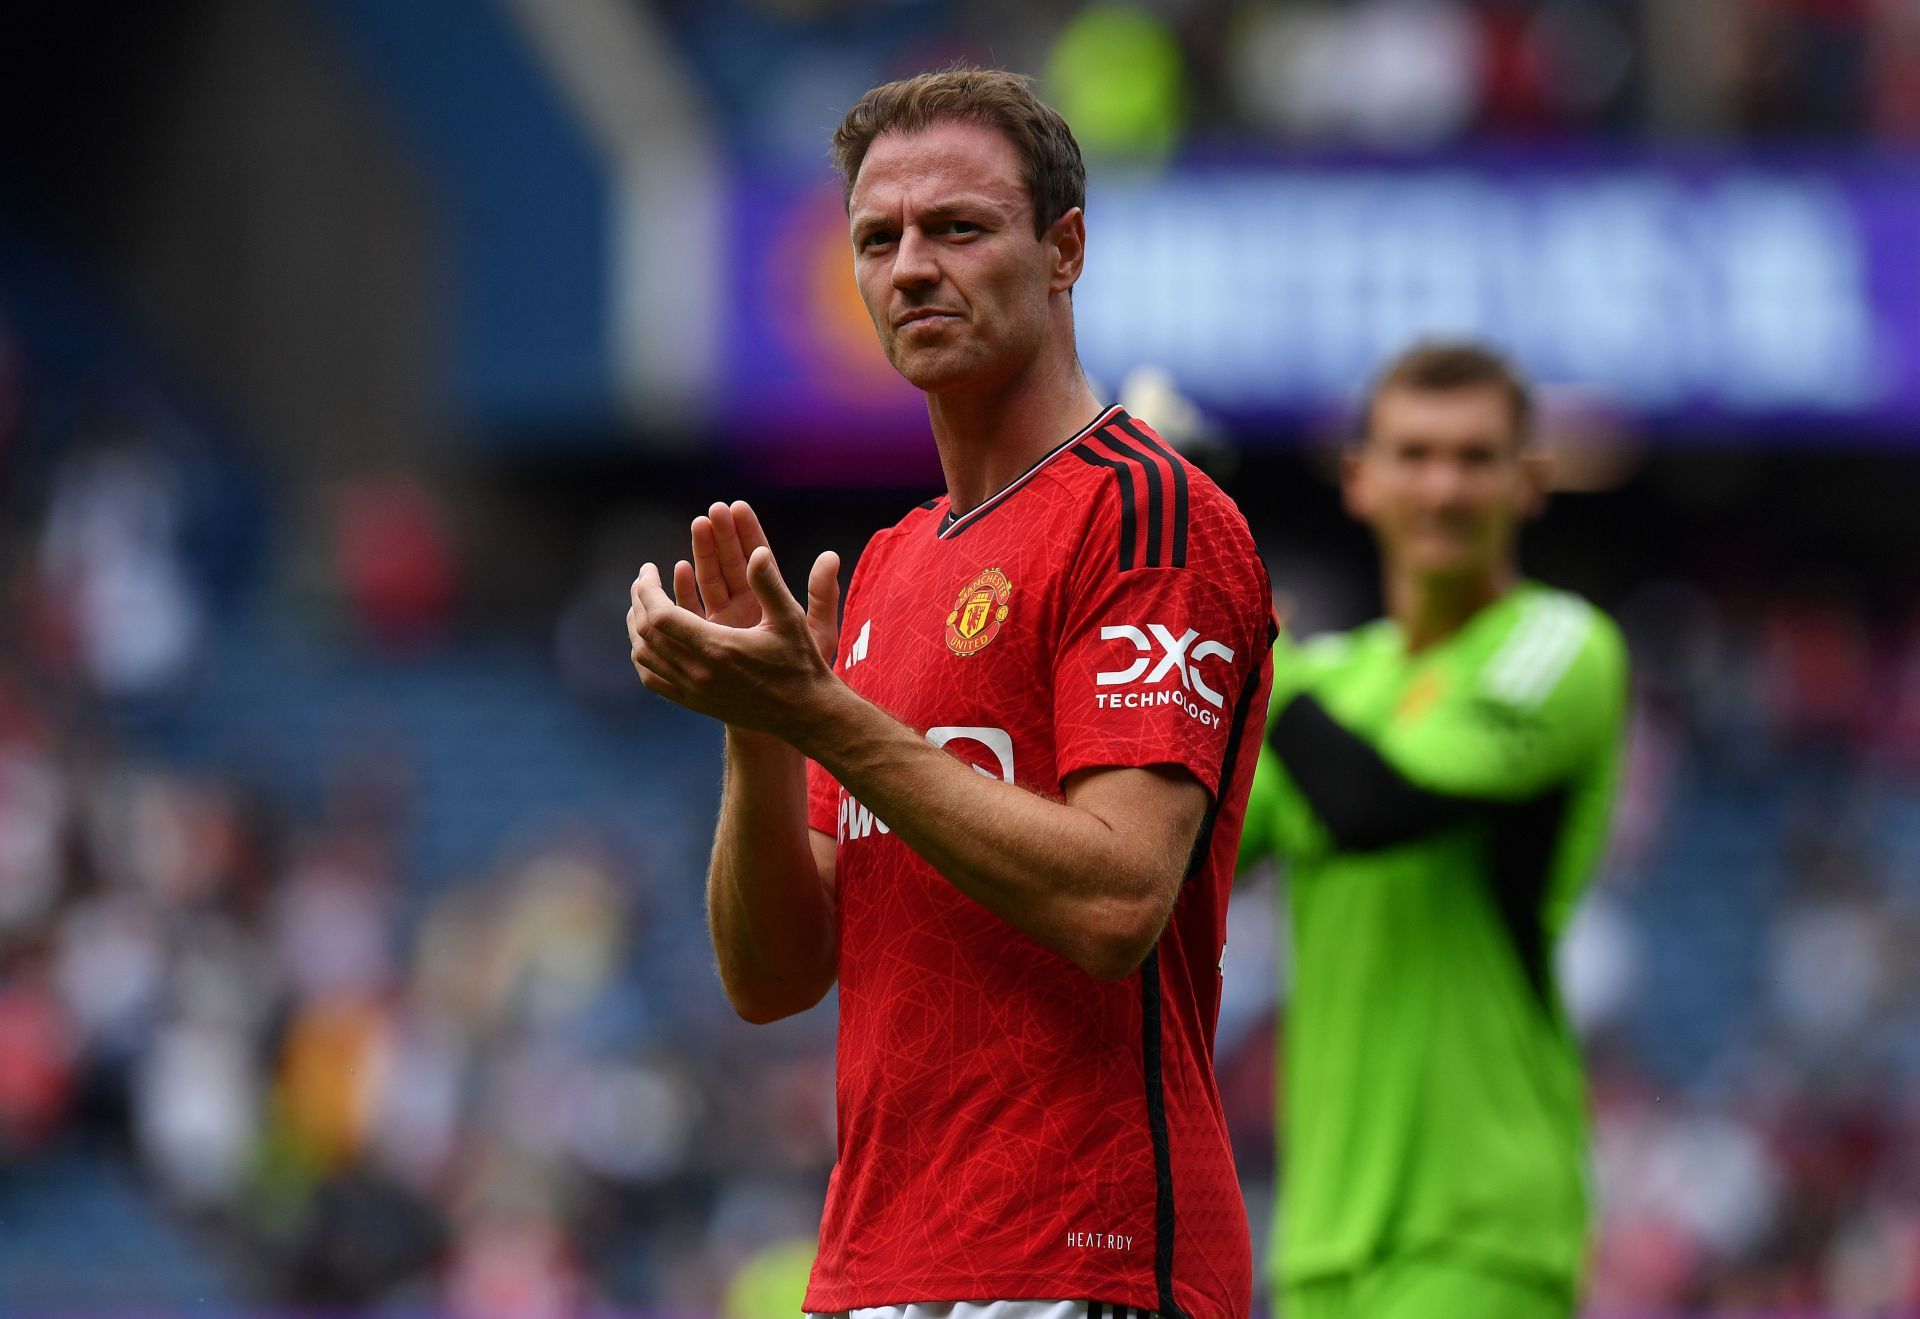 Evans has stepped up for Manchester United in pre-season.